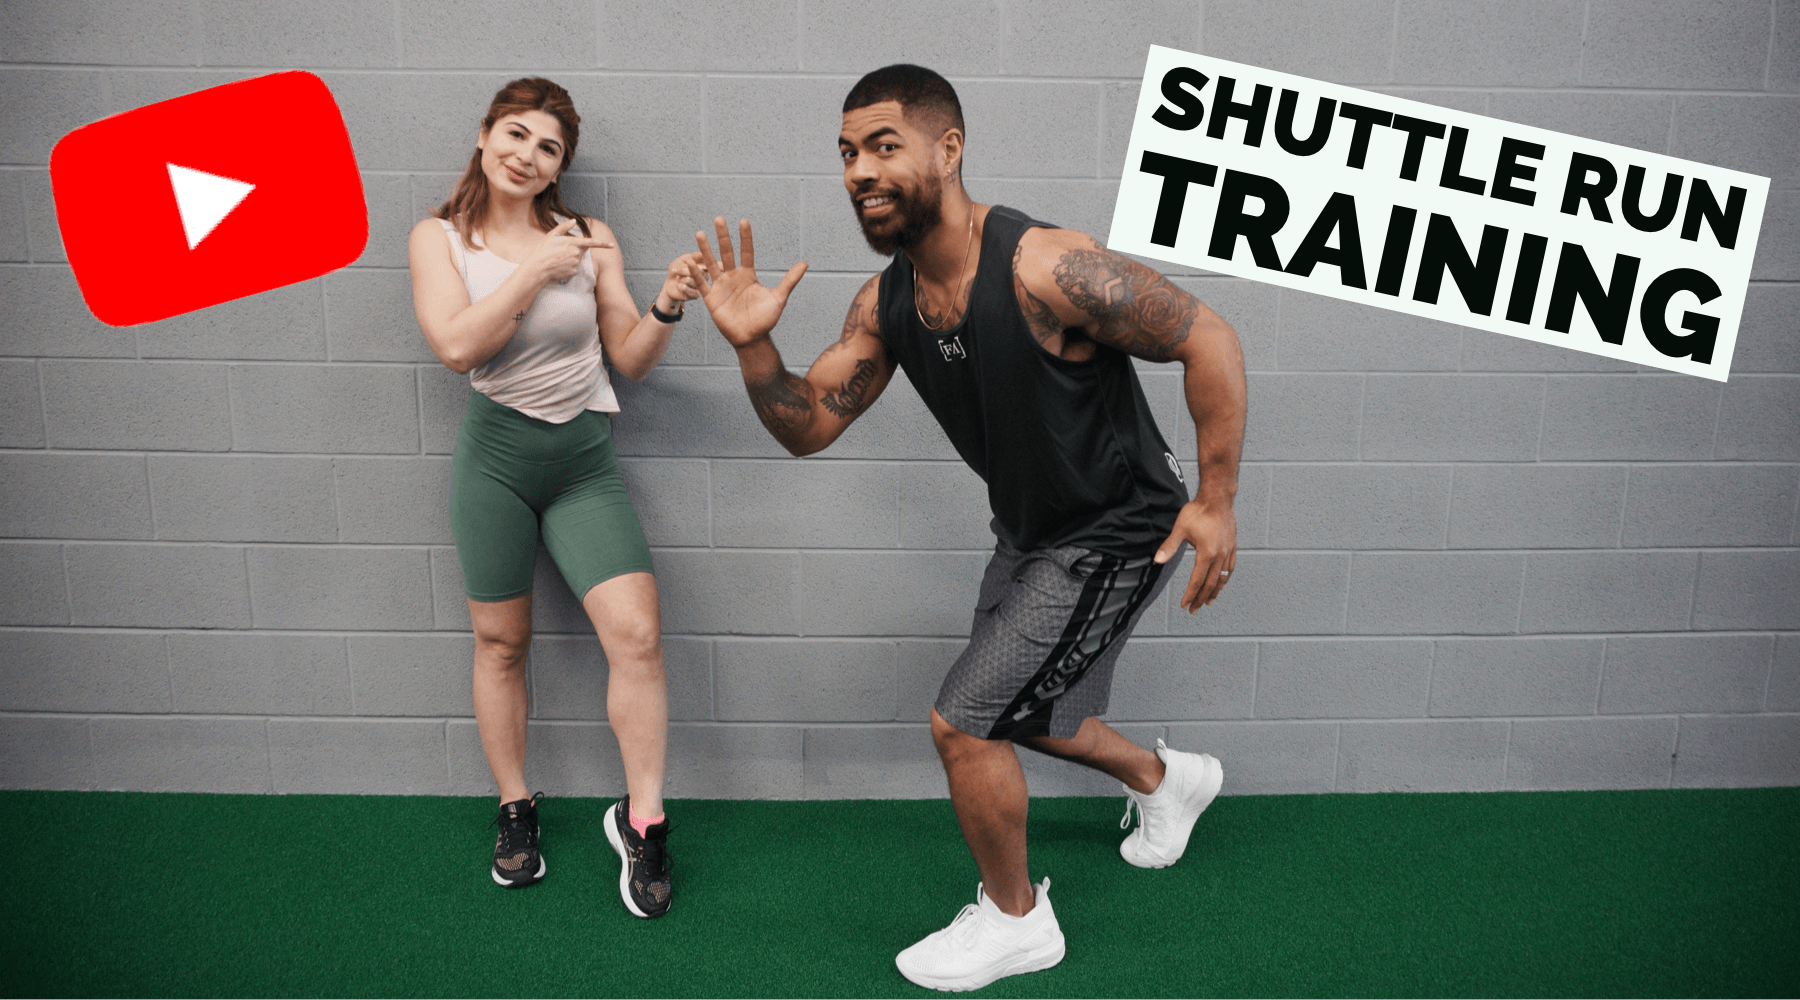 How to train for your shuttle run with Forever Aesthetic | 5 Drills - Forever Aesthetic Company